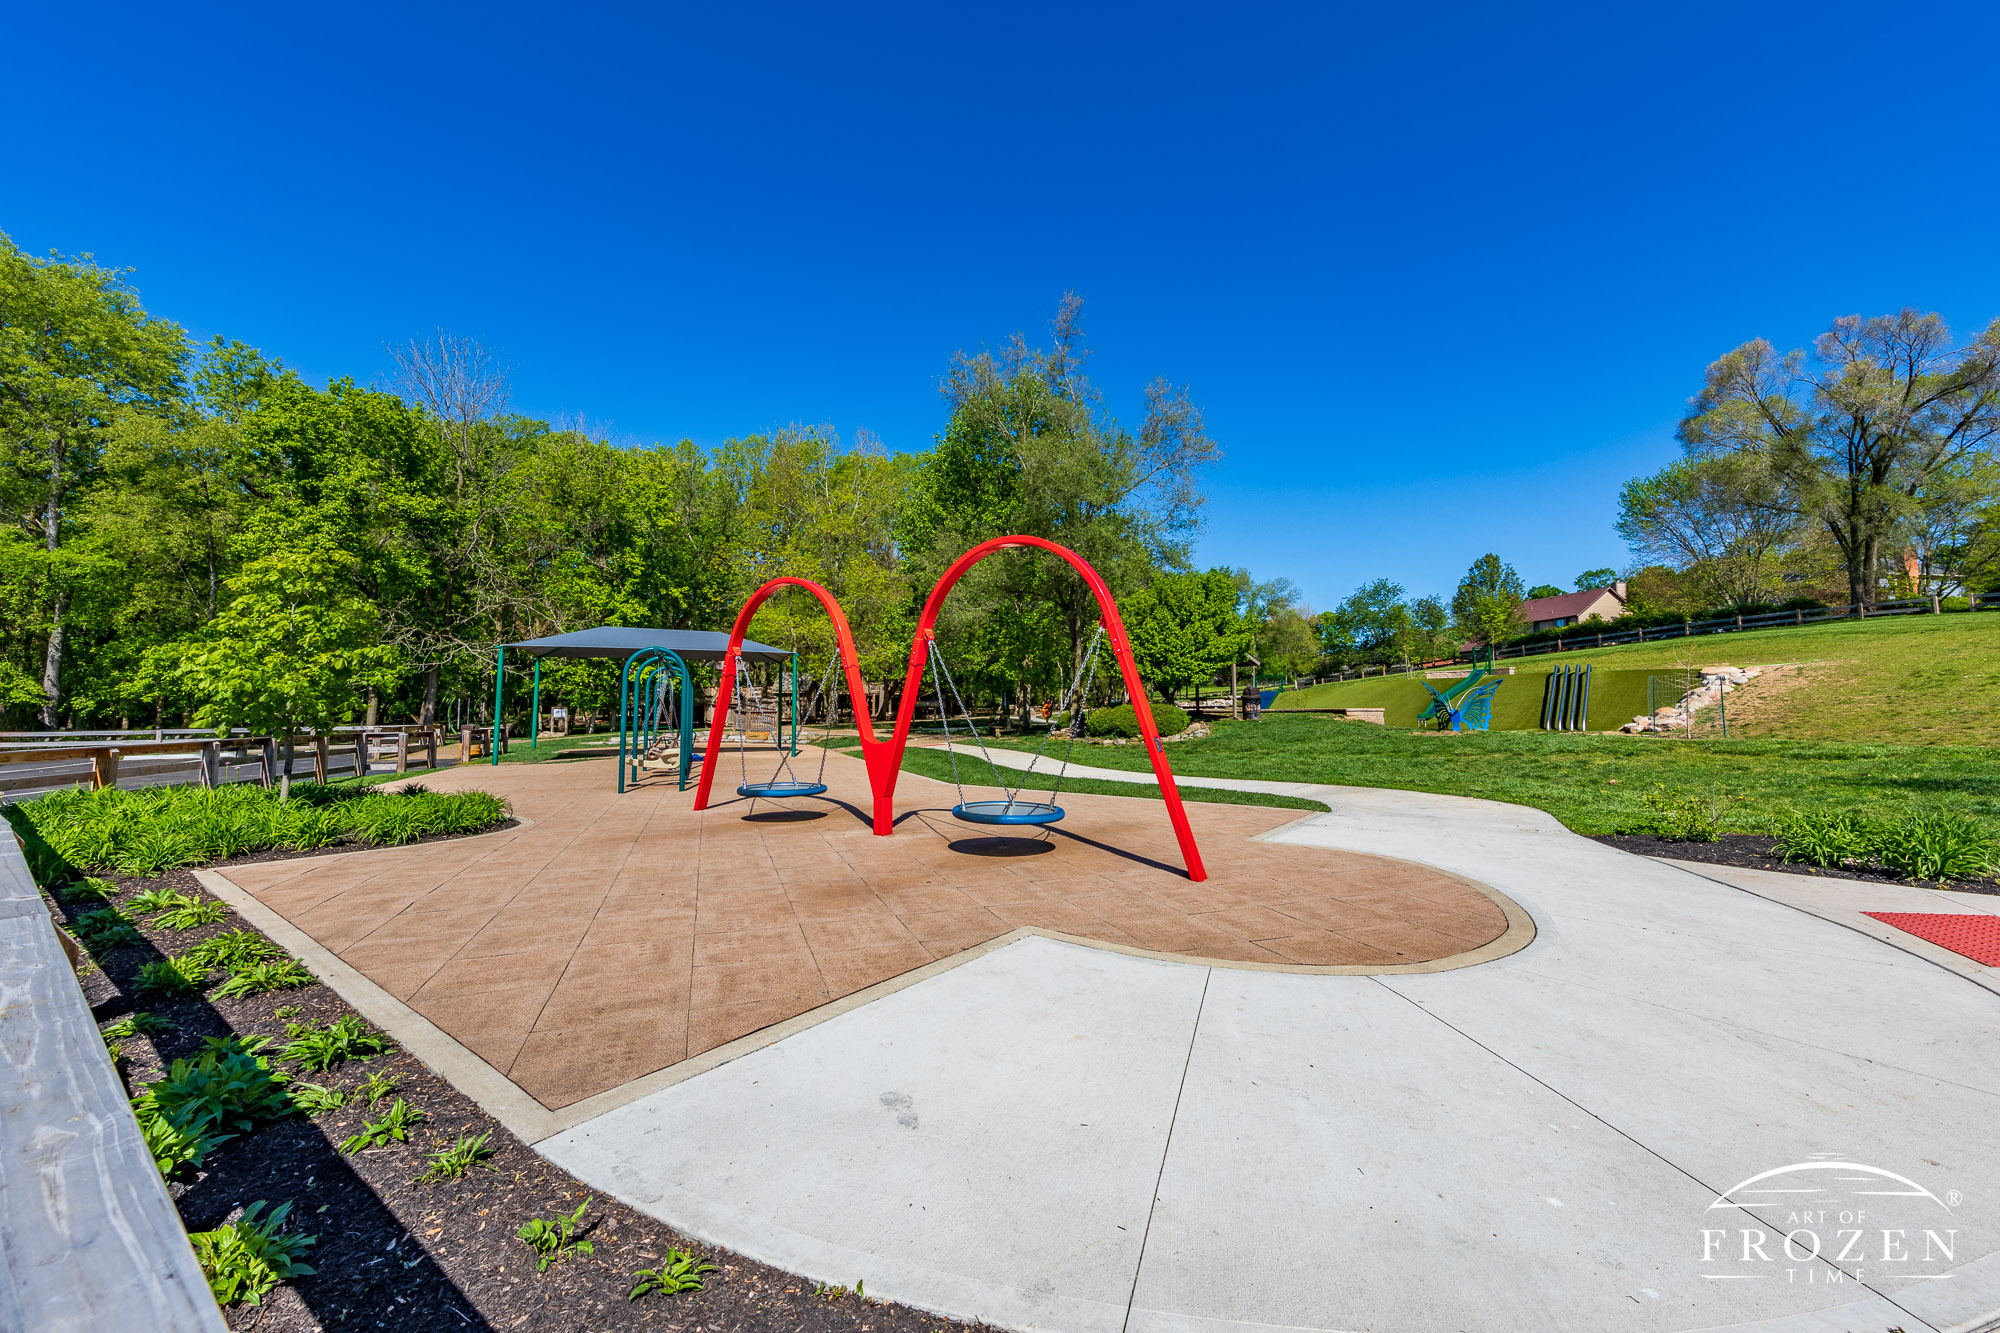 Owen’s Place is a universally accessible playground surrounded by trees and blue skies